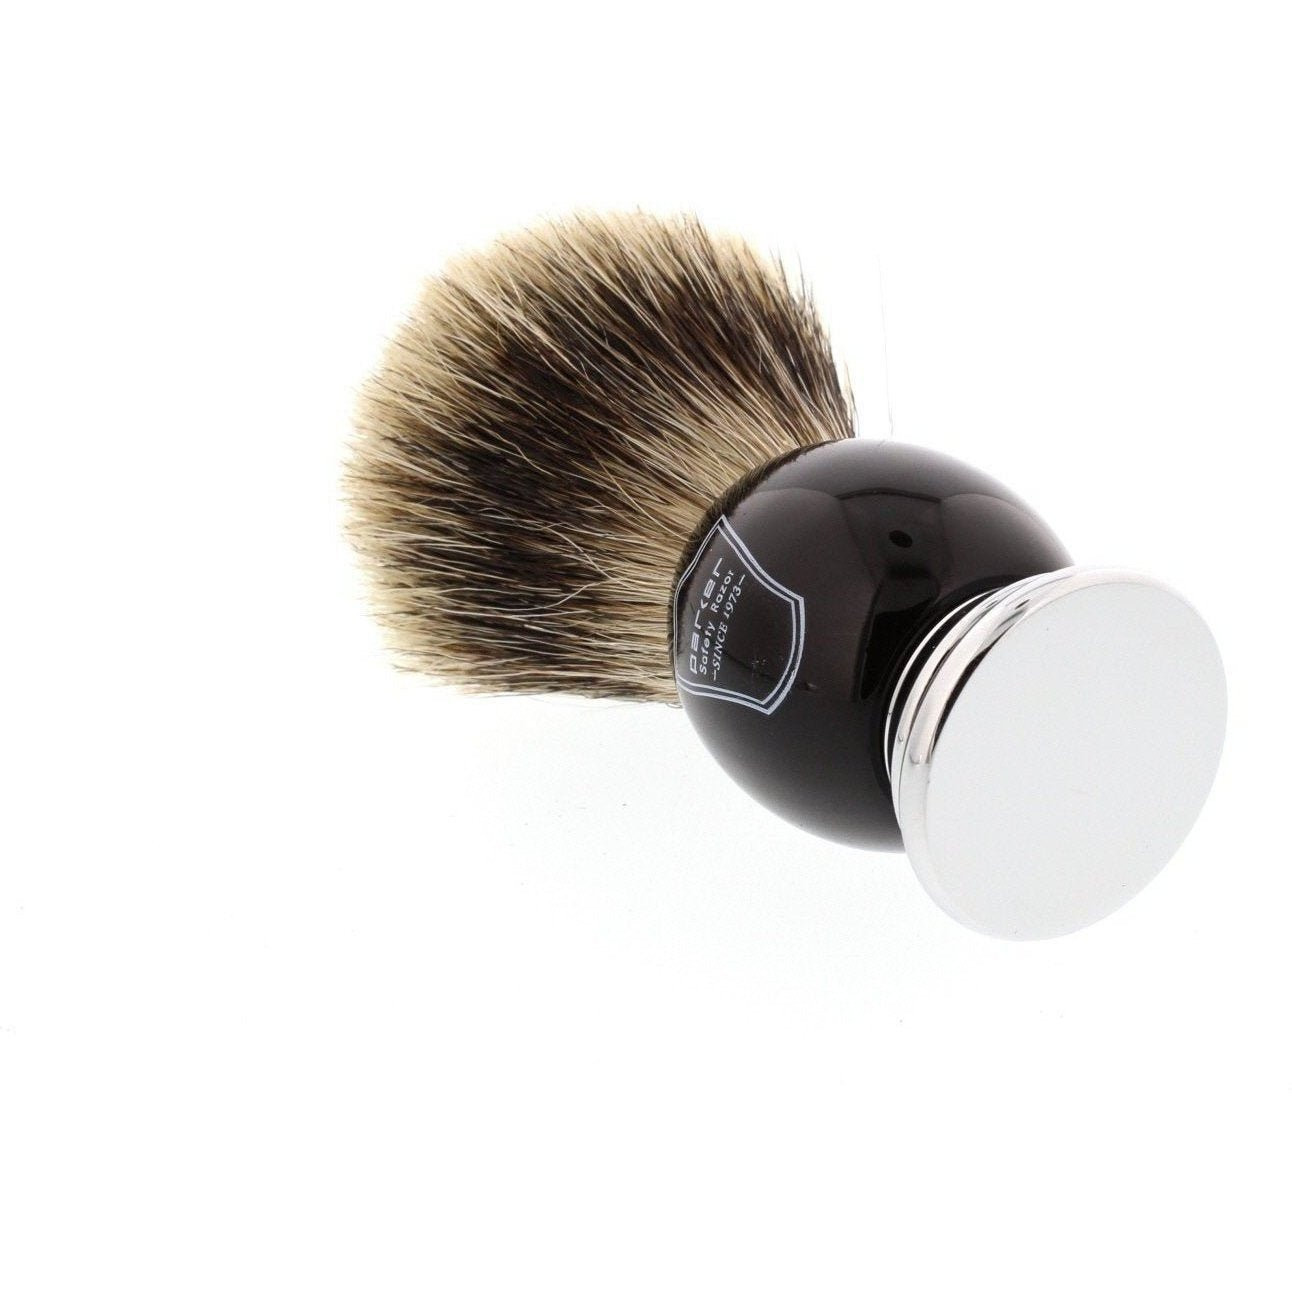 Product image 2 for Parker Pure Badger Shaving Brush, Black and Chrome